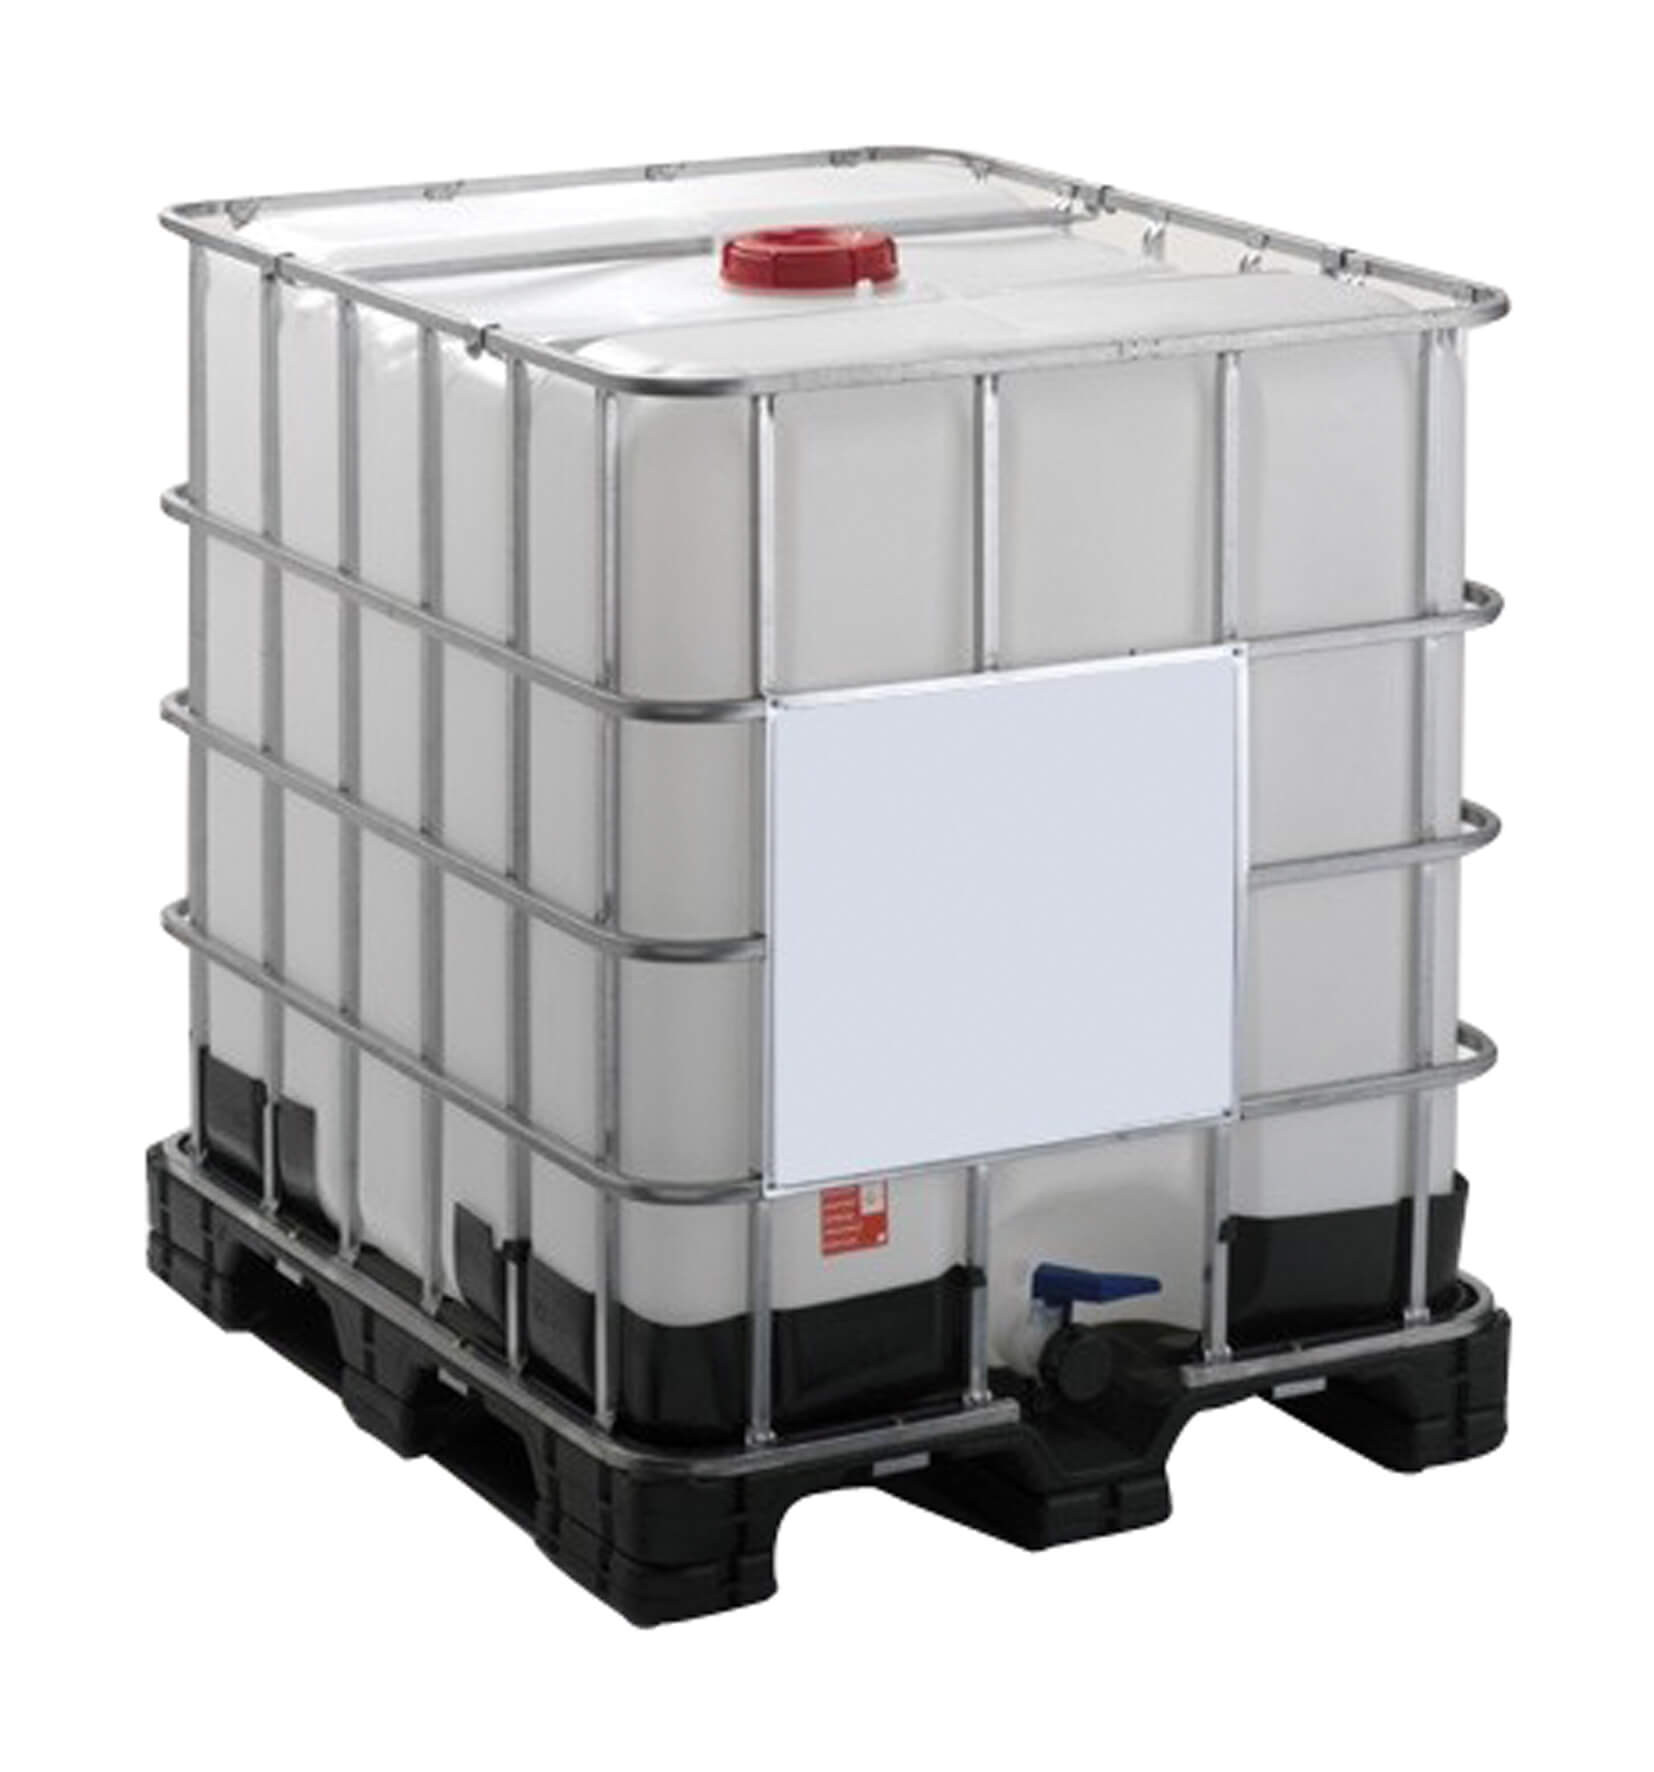 1000-Liter-Container from